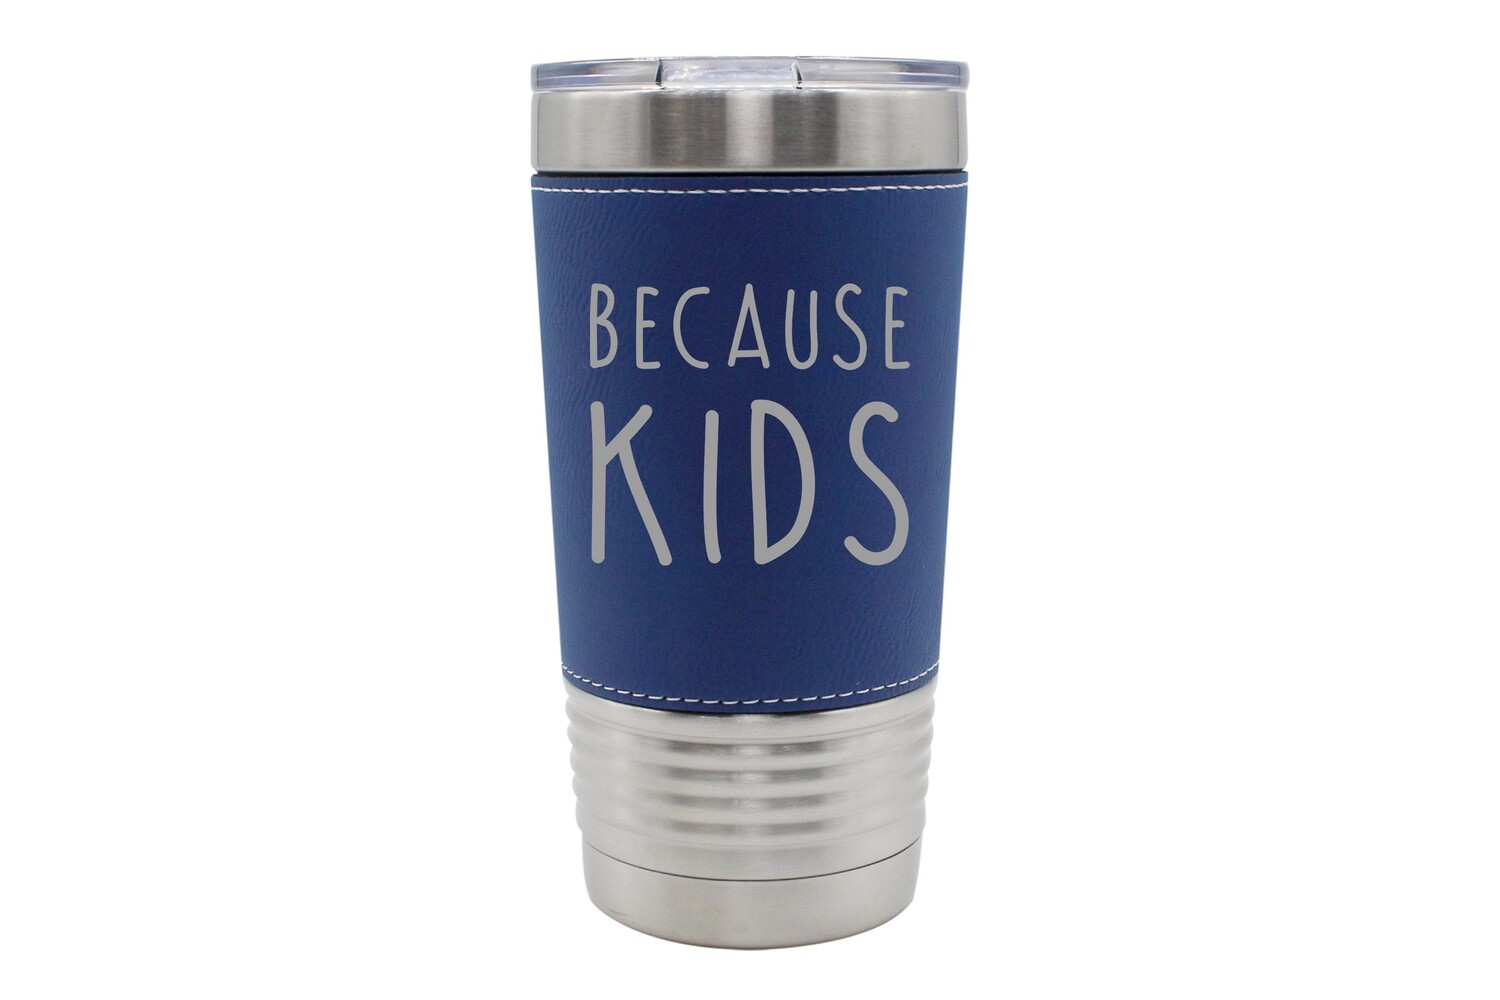 Leatherette 20 oz Because Kids Insulated Tumbler